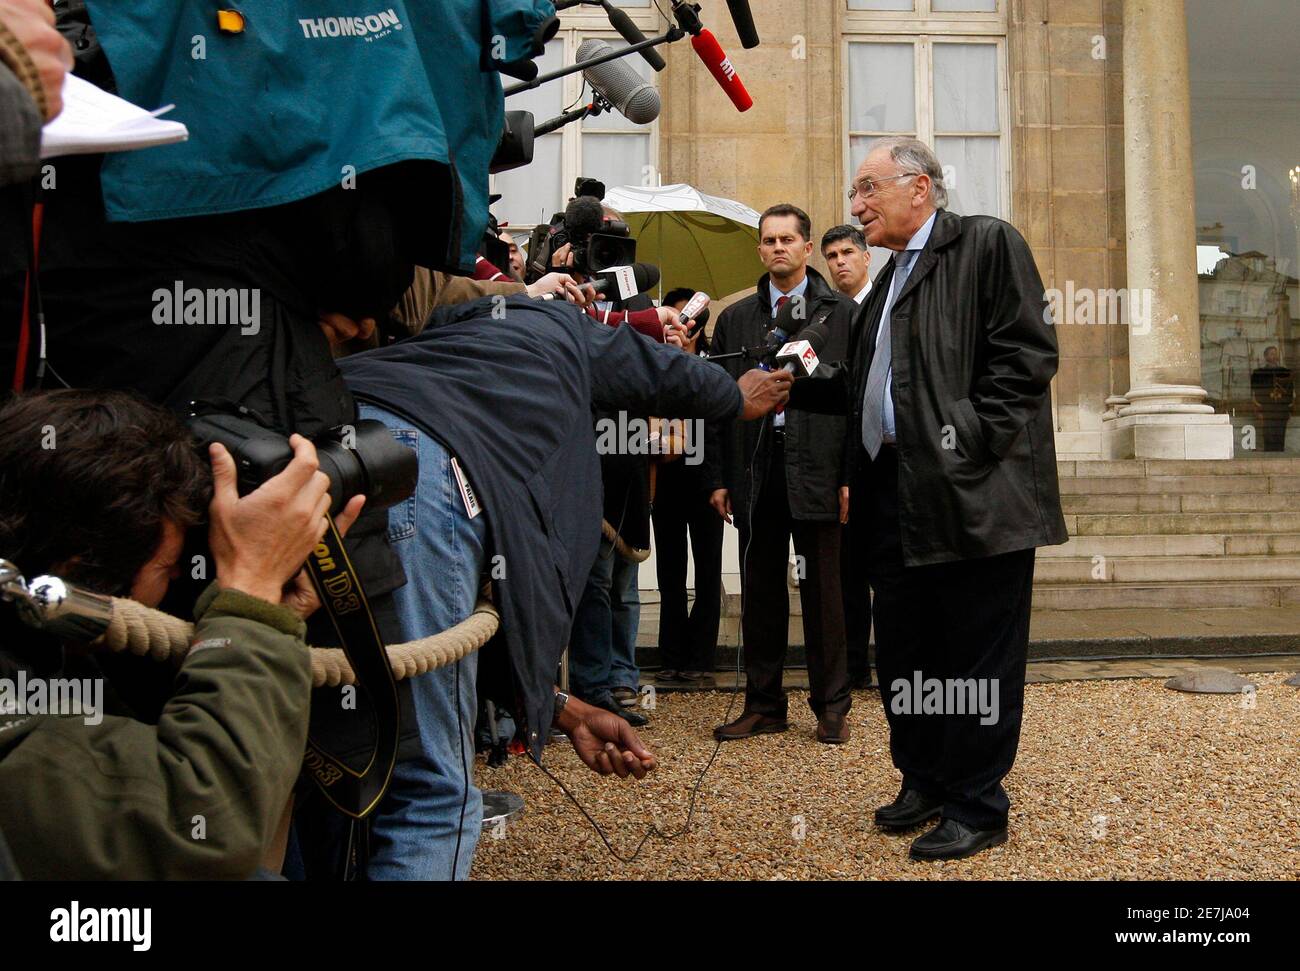 Jean-Pierre Escalettes (R), President of the French football federation (FFF),  speaks to the media in the courtyard at the Elysee Palace after a meeting  with France's President Nicolas Sarkozy in Paris October